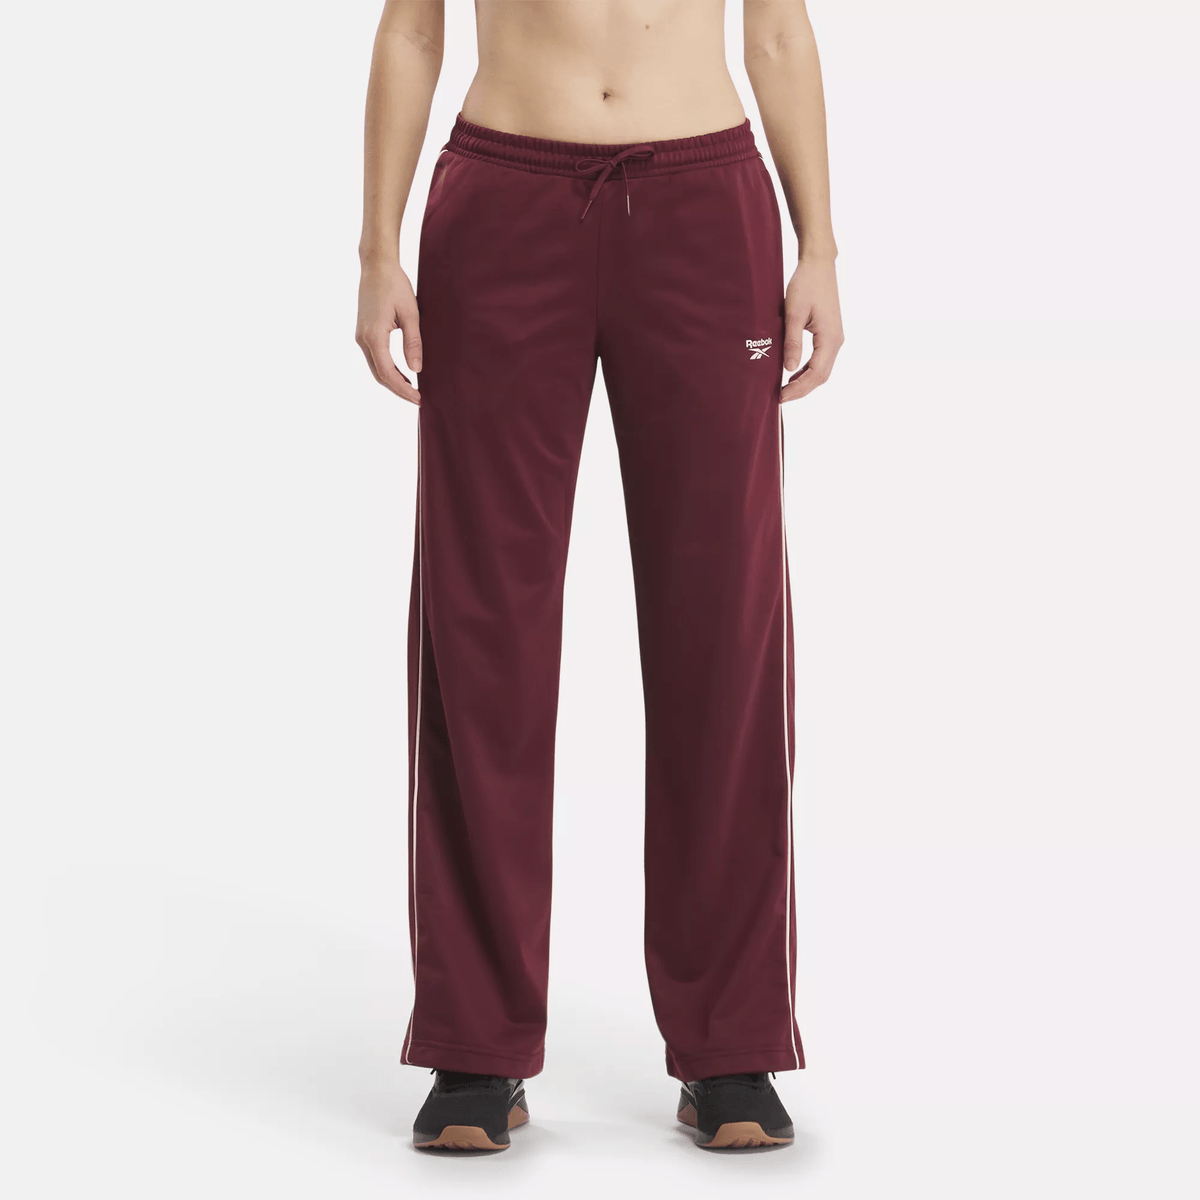 Reebok Women's Identity Back Vector Tricot Track Pants Red